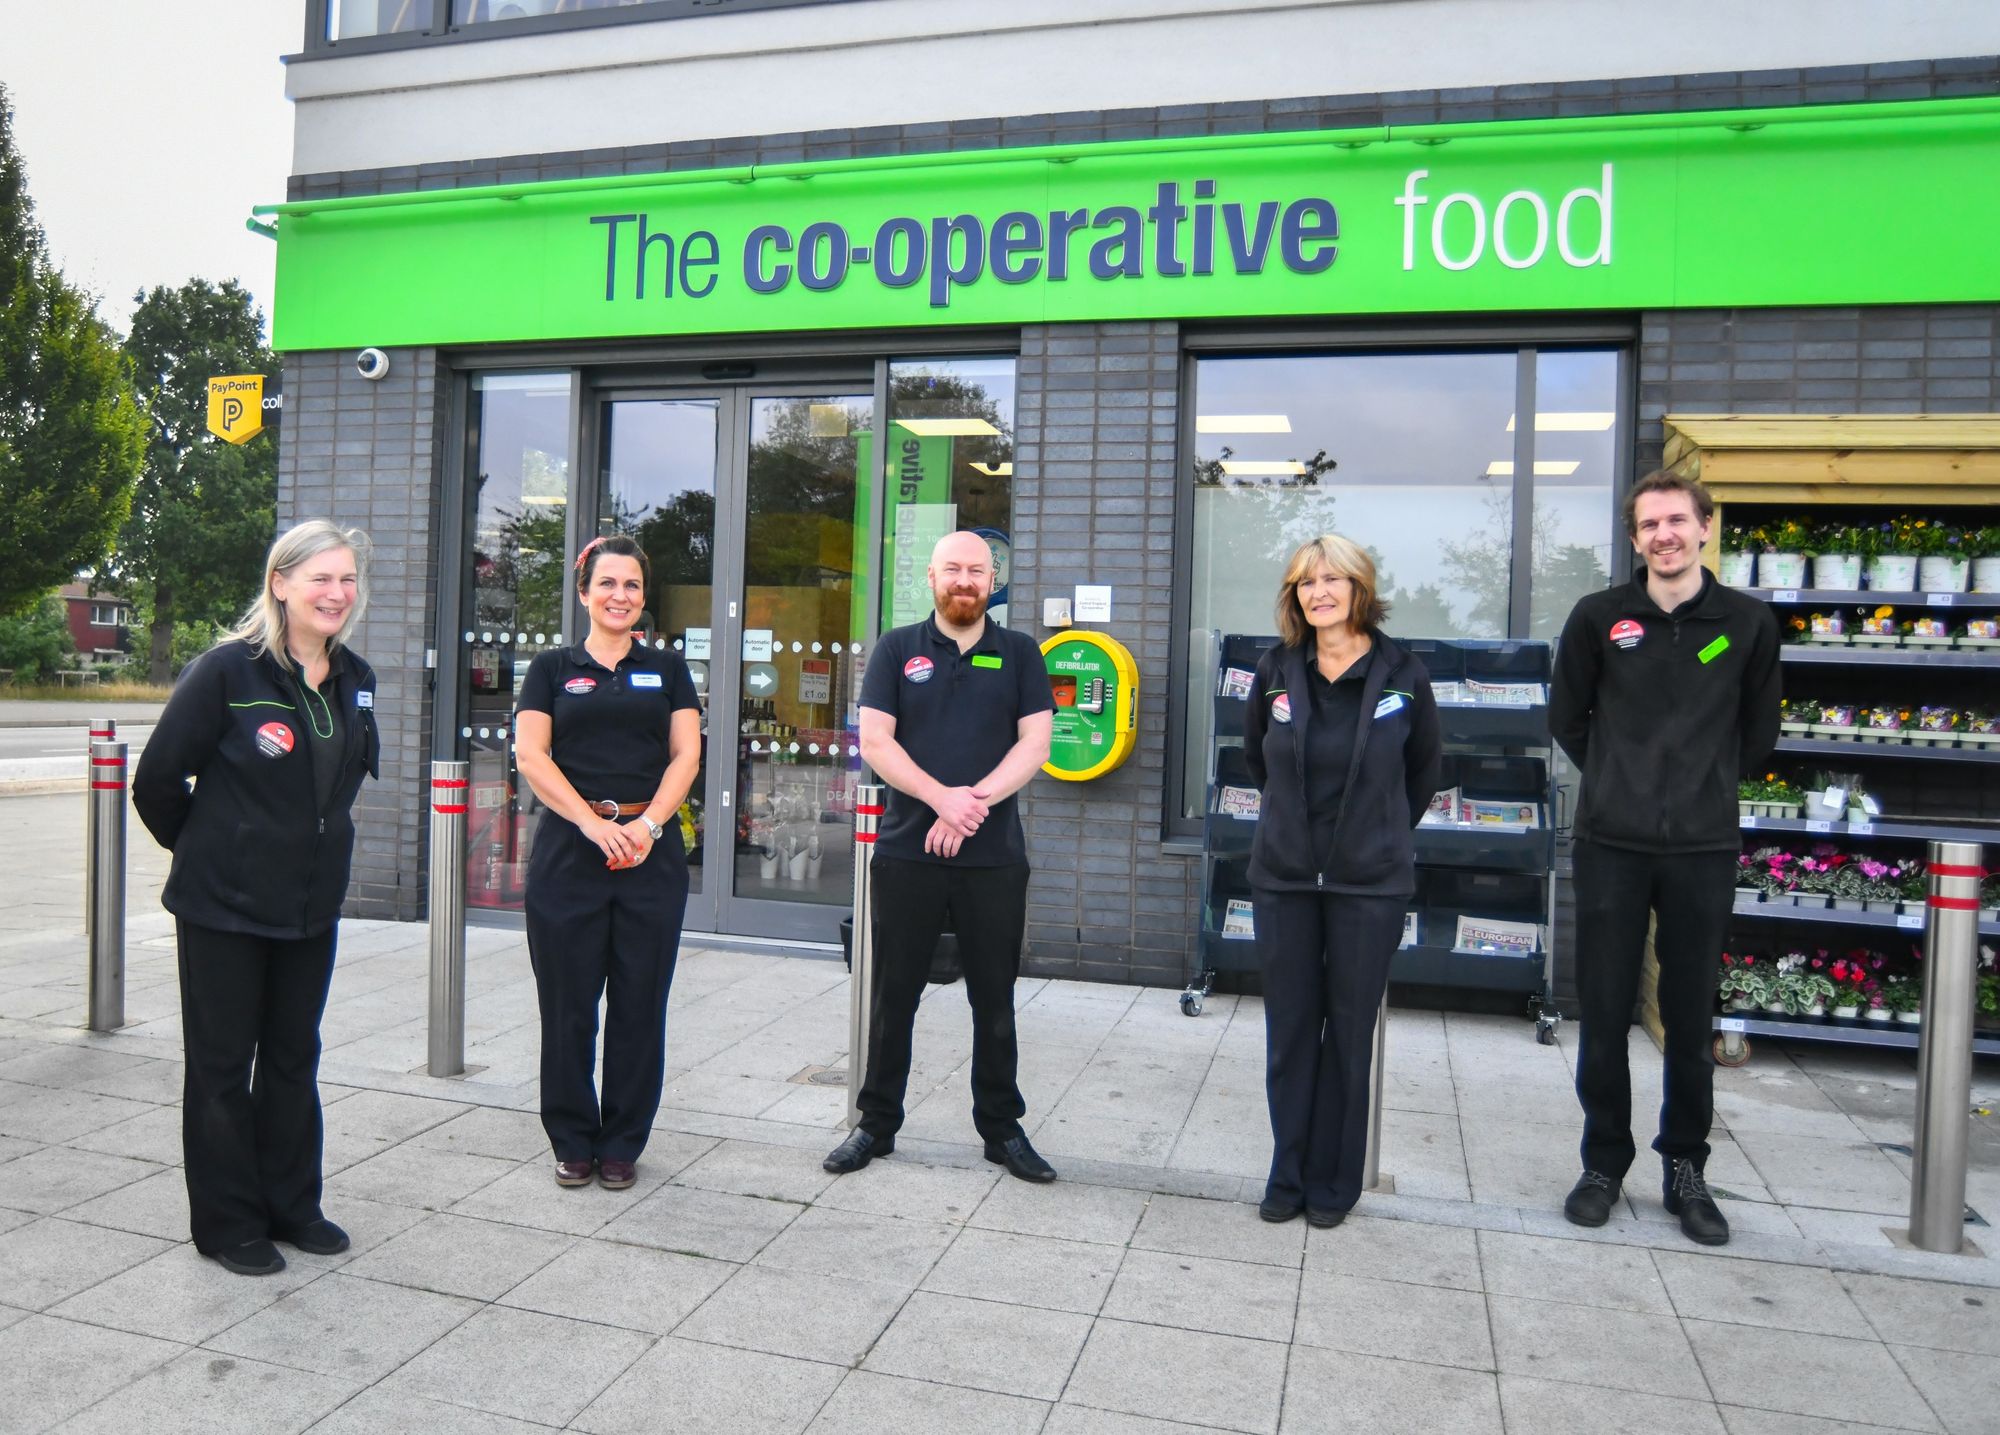 Two more Central England Co-op stores receive makeovers in Birmingham and Norfolk